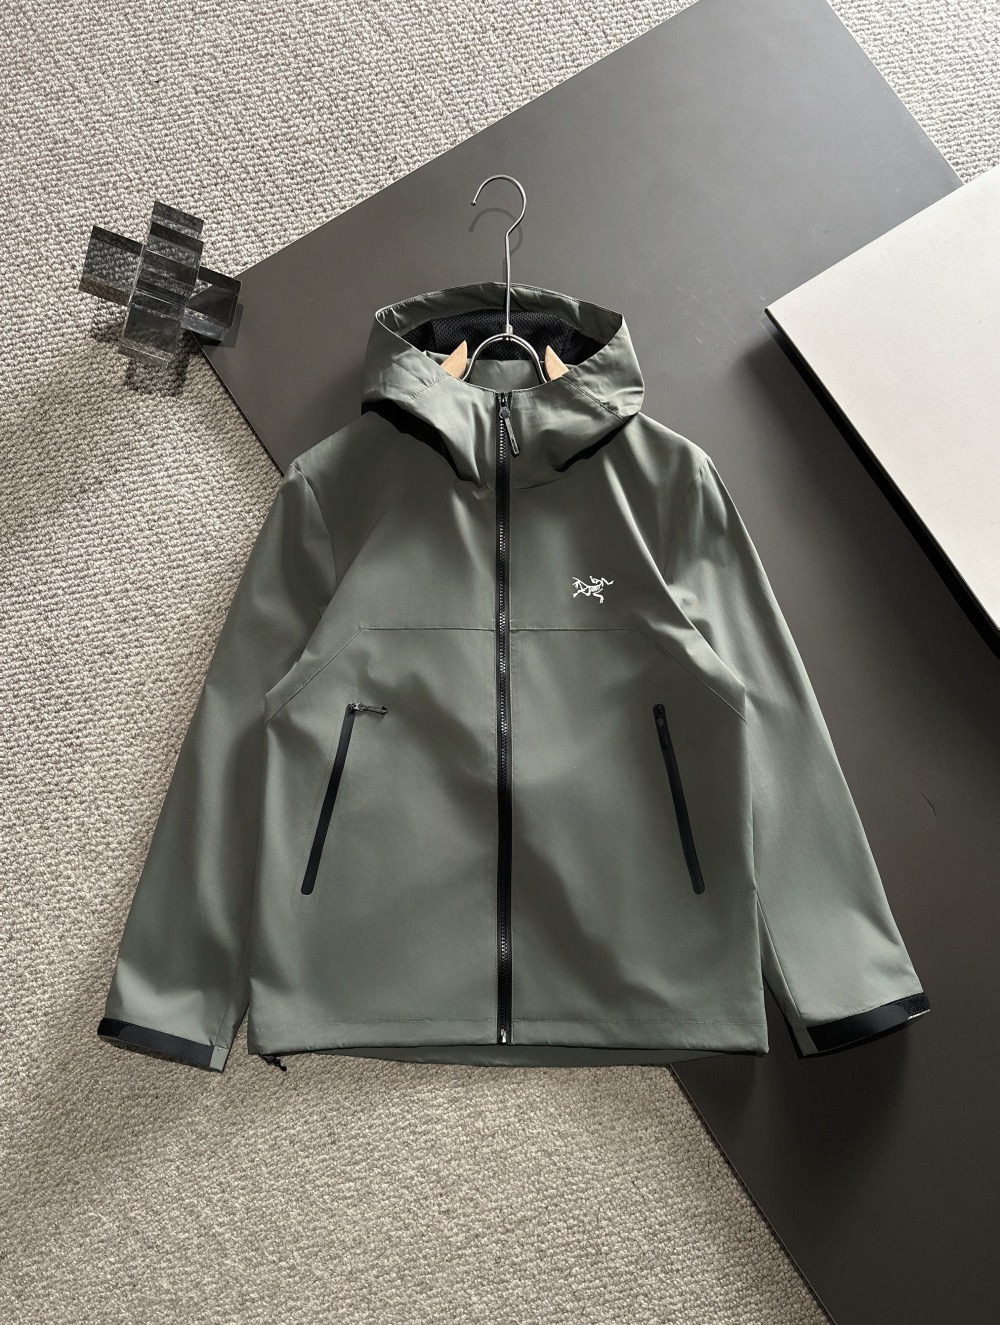 Wholesale Designer Shop
 Arc’teryx Clothing Coats & Jackets UK 7 Star Replica
 Spring Collection Fashion Casual